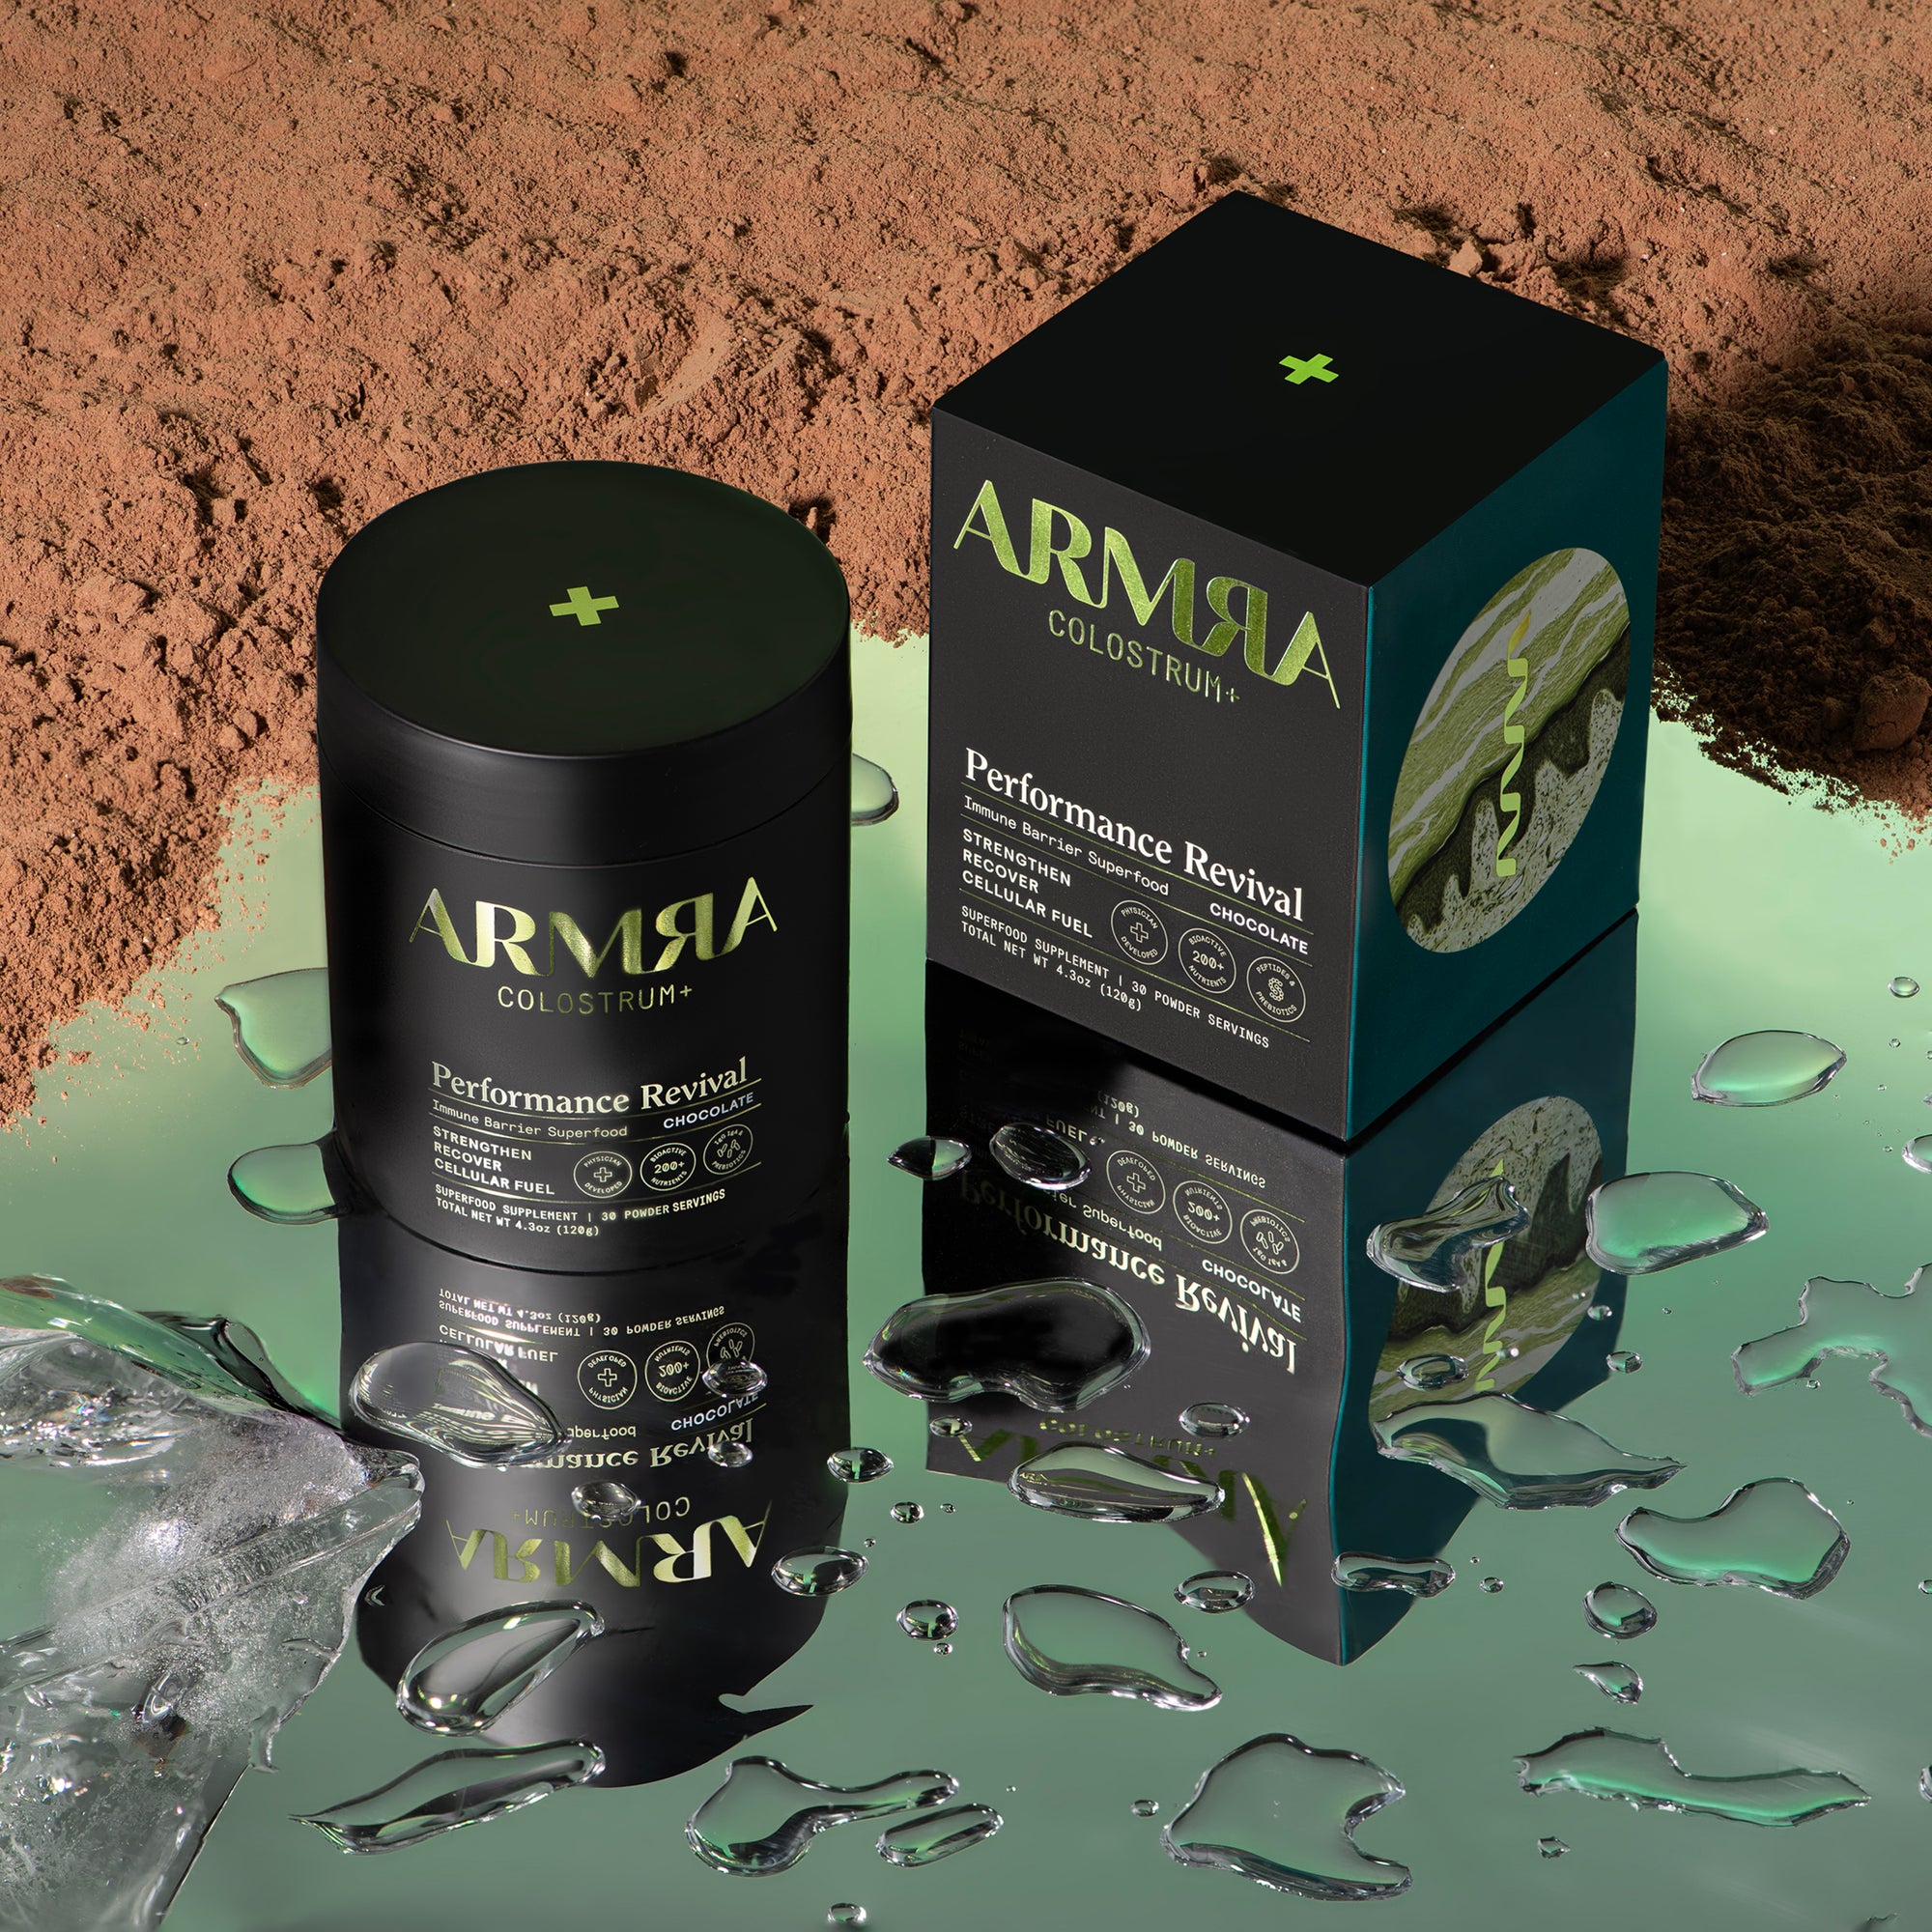 Jar of ARMRA Colostrum™ Performance Revival and Performance Revival Packaging on a mirrored surface with chocolate colostrum powder.